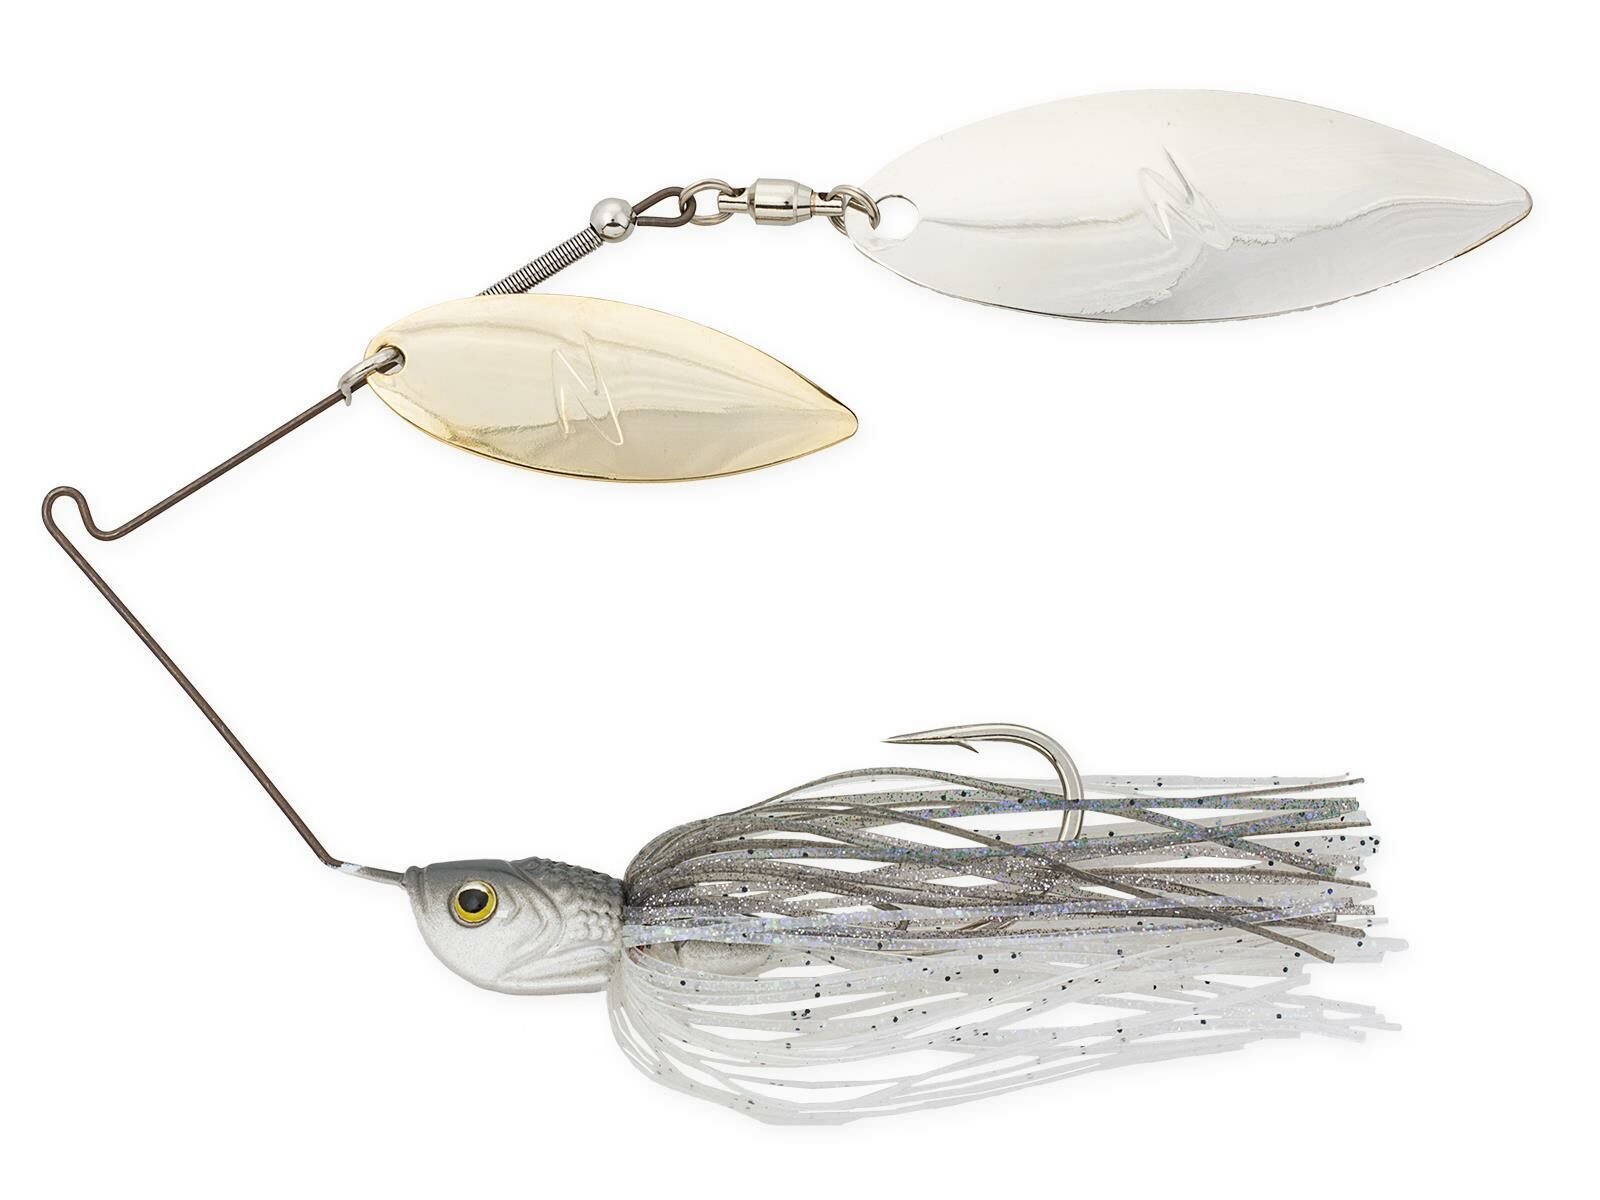 10.5g SlingBladeZ Double Willow - Clearwater Shad